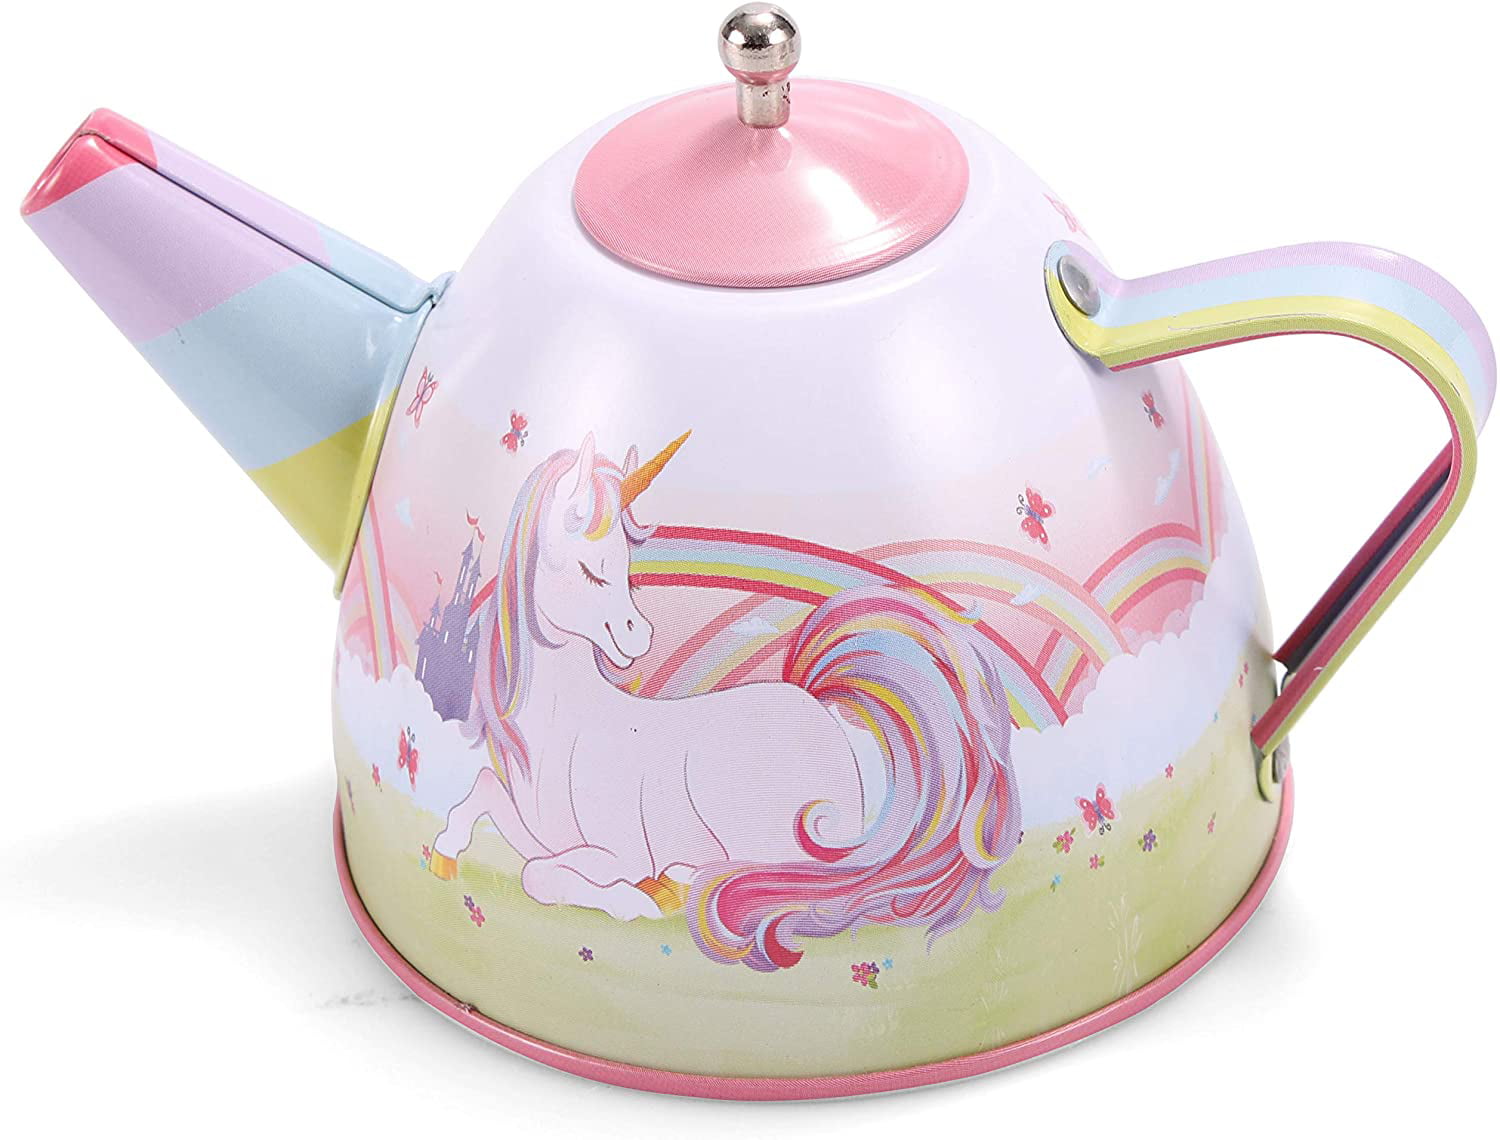 Purple PP PICADOR Tin Tea Party Set for Little Girls Pretend Kitchen Play Princess Age 3 4 5 6 7 8 Unicorn Party Toys Teapot Set with Storage Case and Accessories Plates 